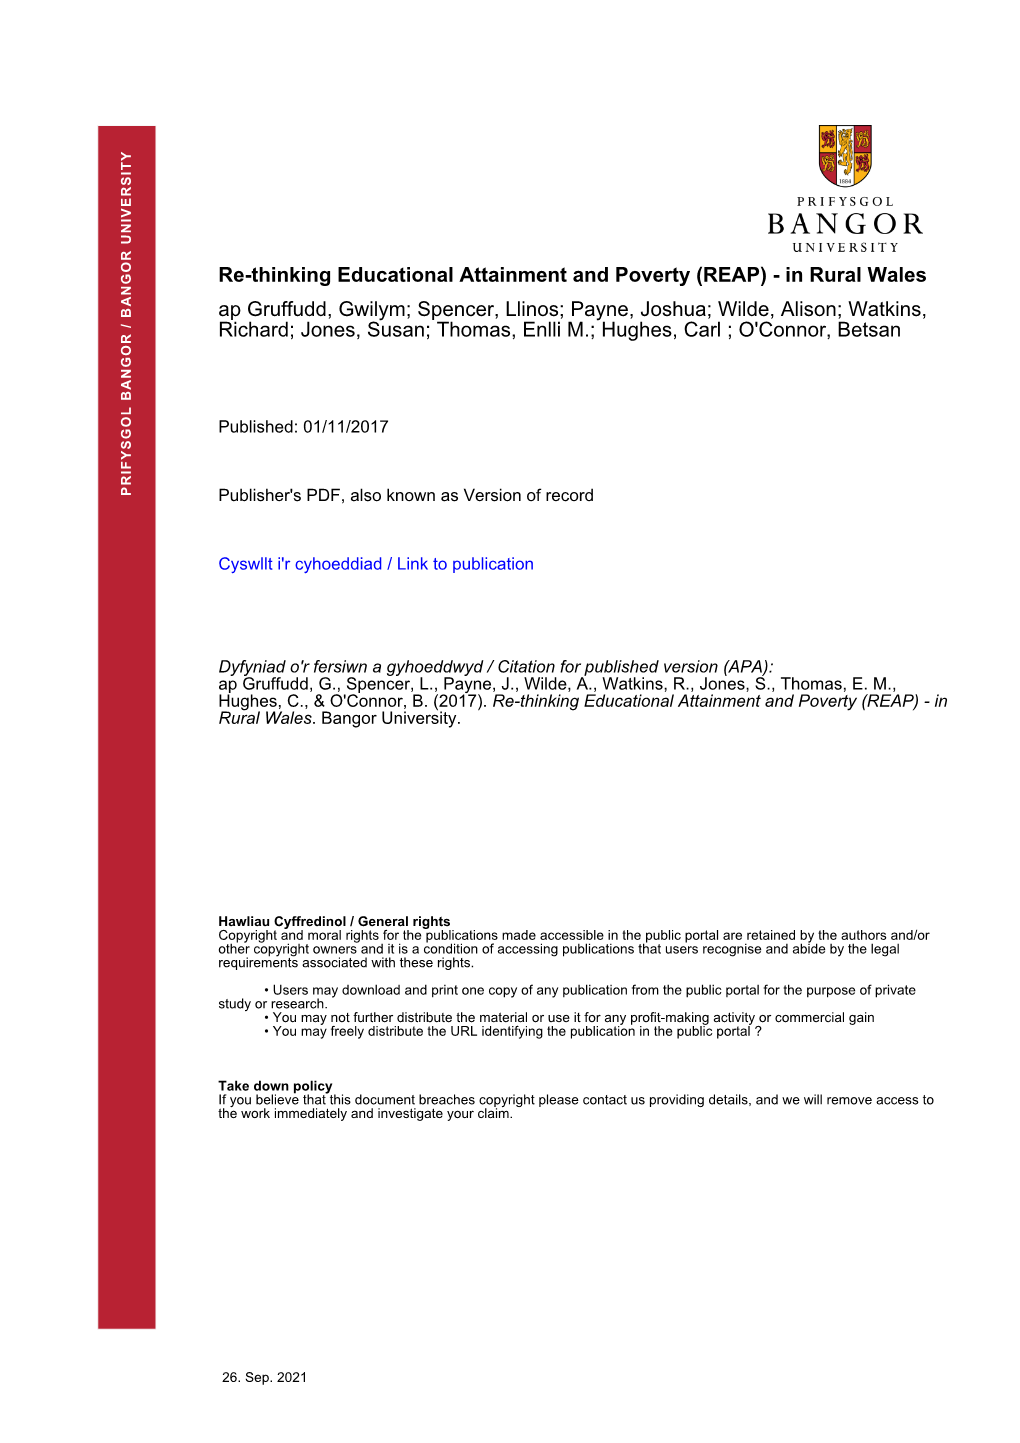 Rethinking Educational Attainment and Poverty – in Rural Wales Final